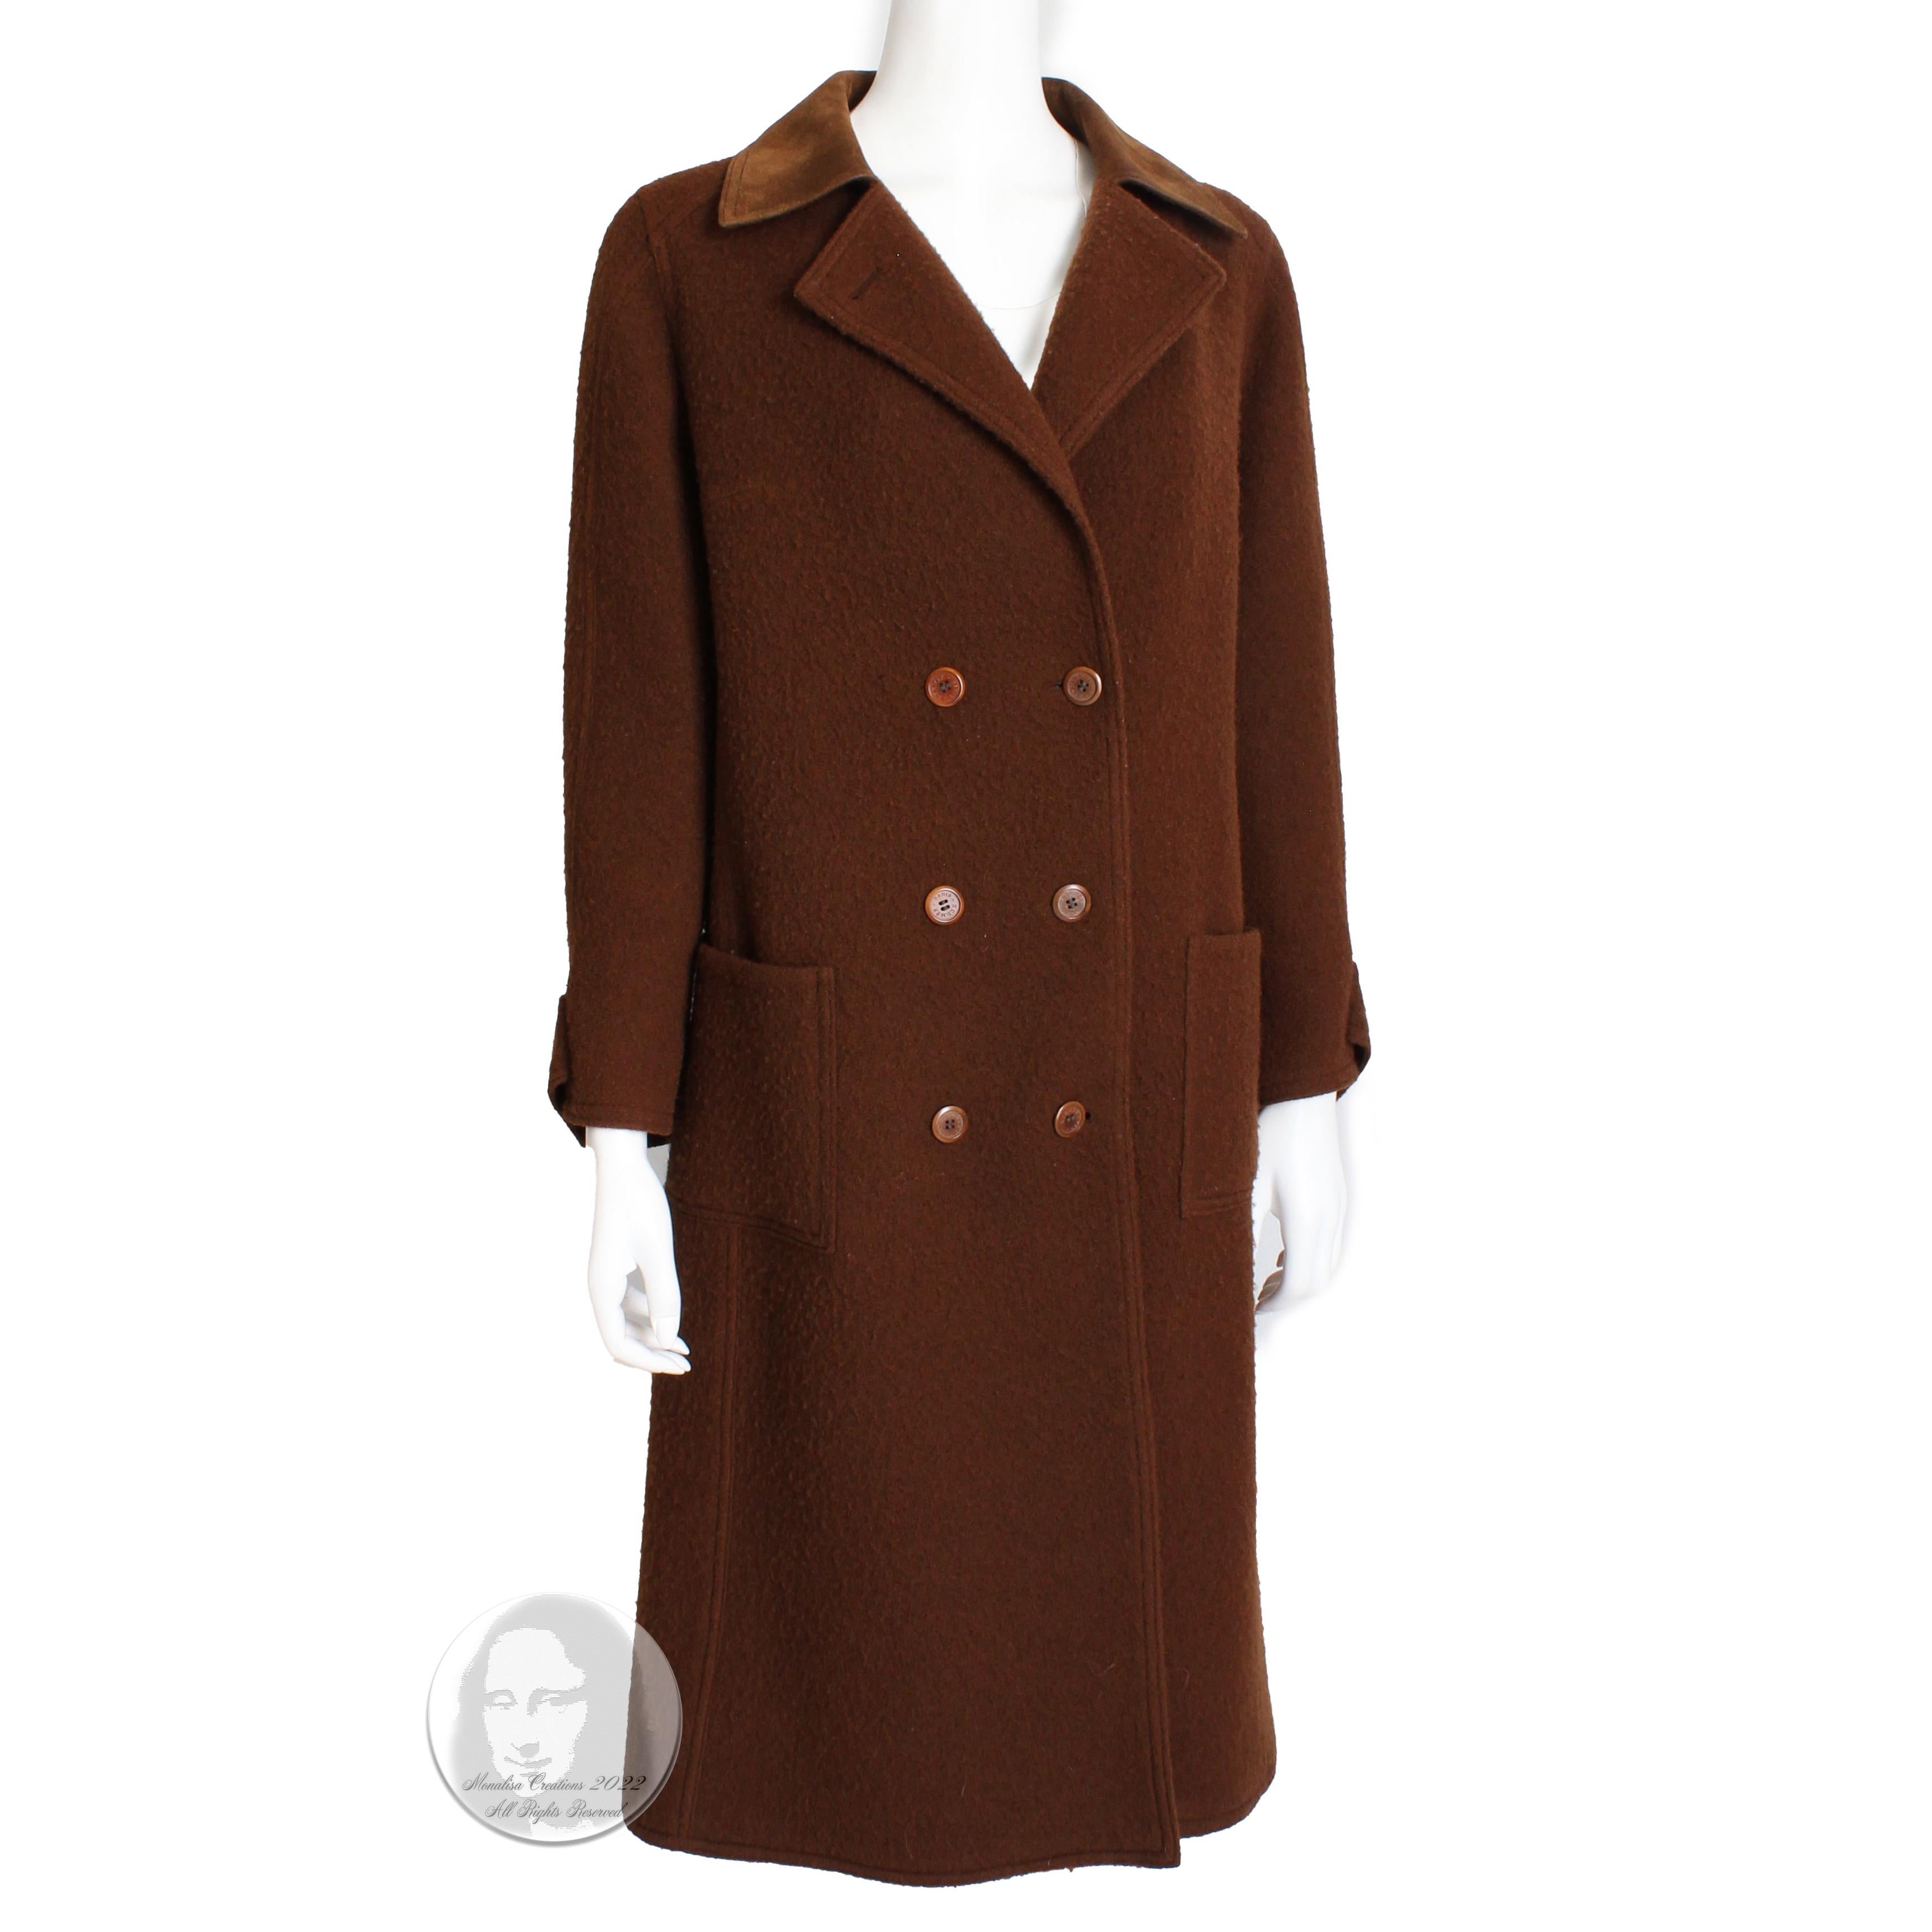 This fabulous coat was made by Hermes Paris, most likely in the late 1970s.  Made from a boiled wool blend in brown, it features a supple brown suede collar.  Timeless styling and construction on this piece - perfect for the fall and winter